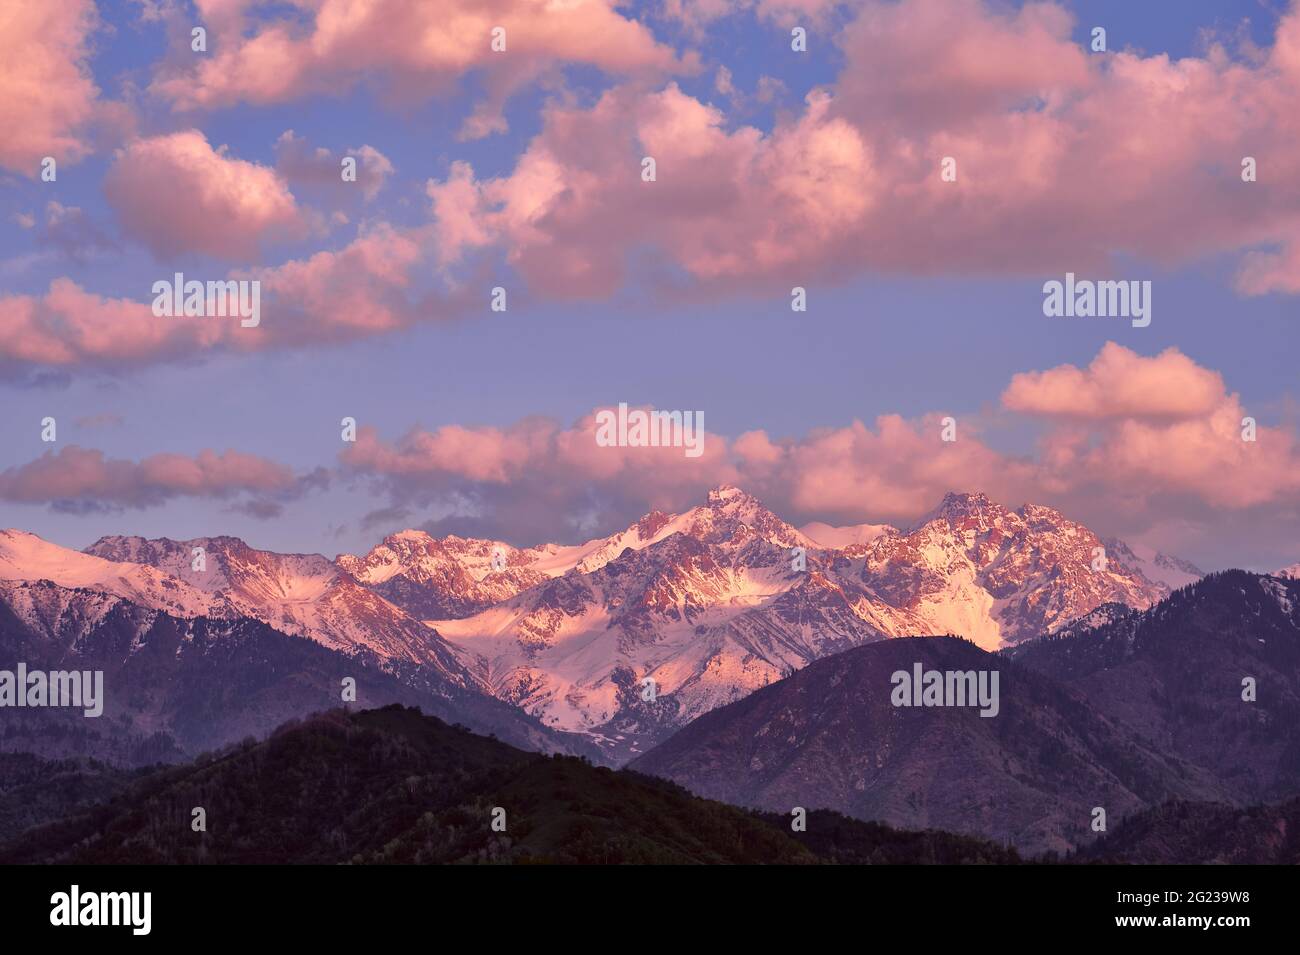 Majestic rocky peaks with fir forest on the background of  blue sky with clouds at sunset Stock Photo